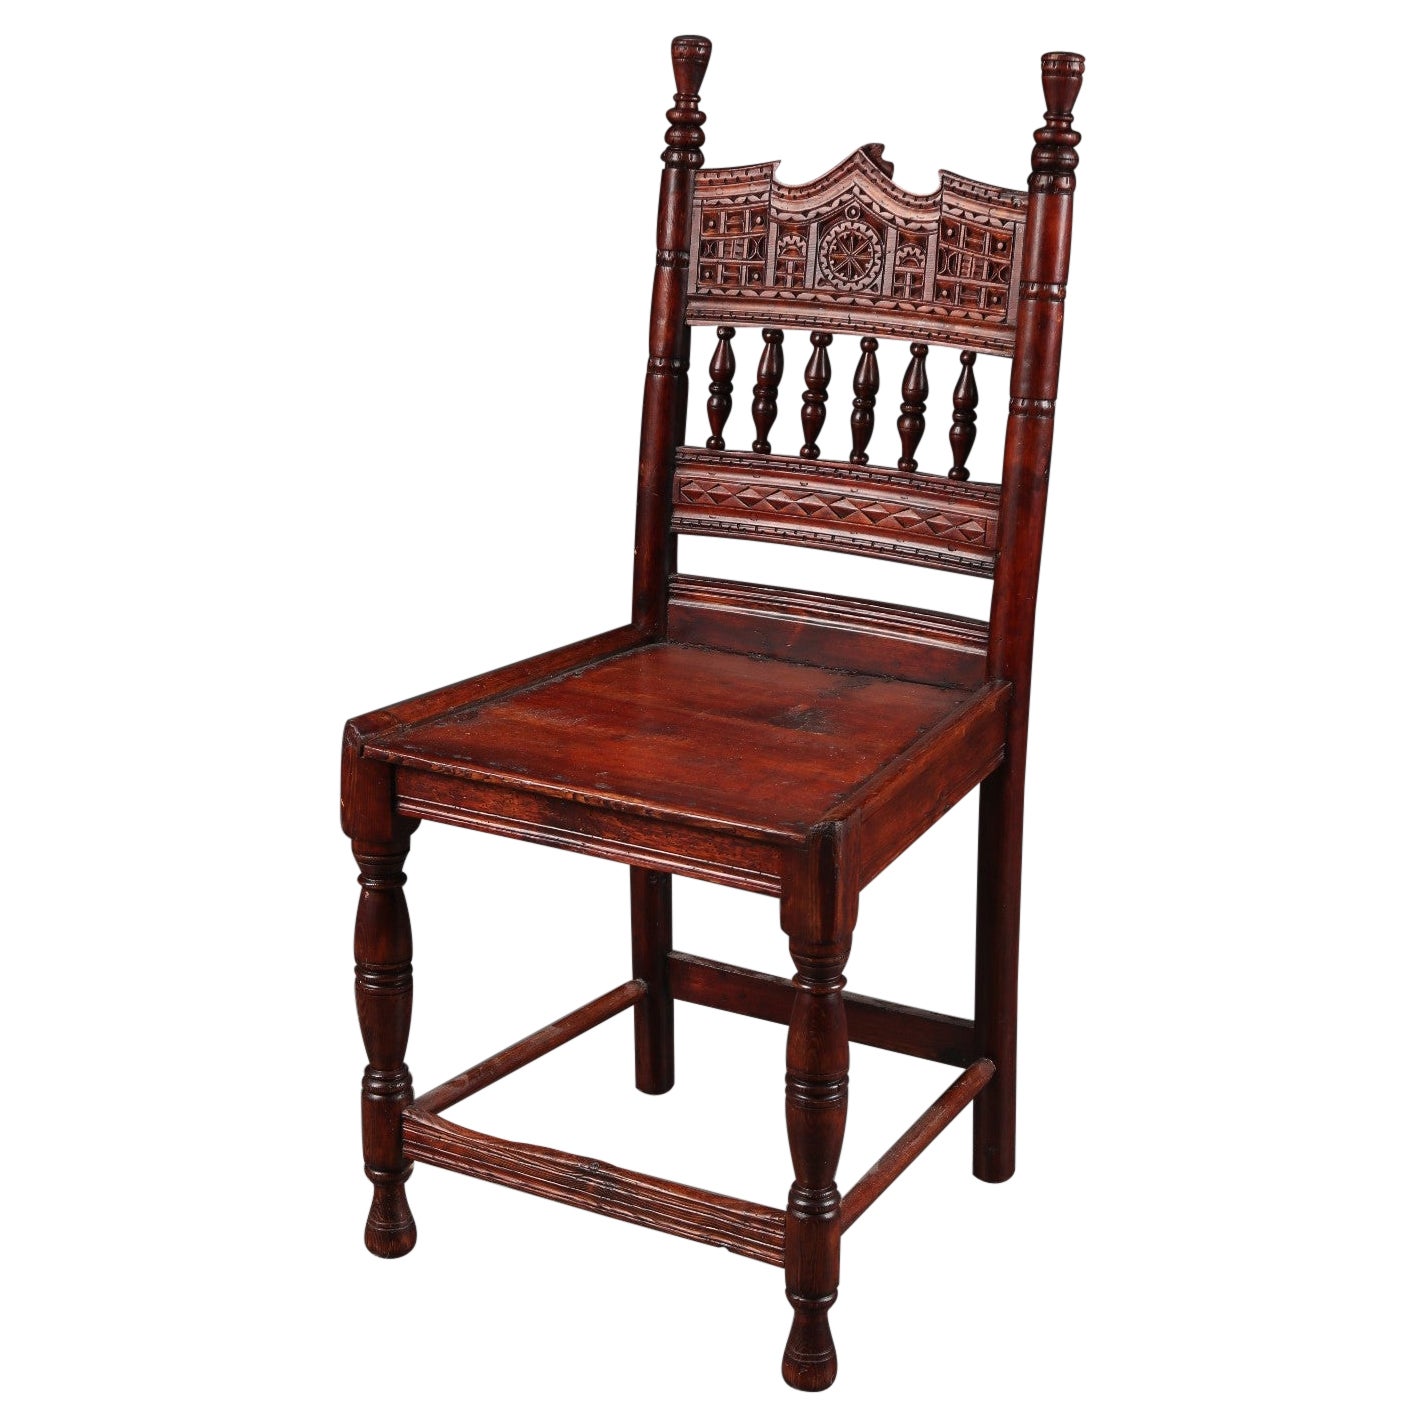 Chinese Chair of Carved Hardwood